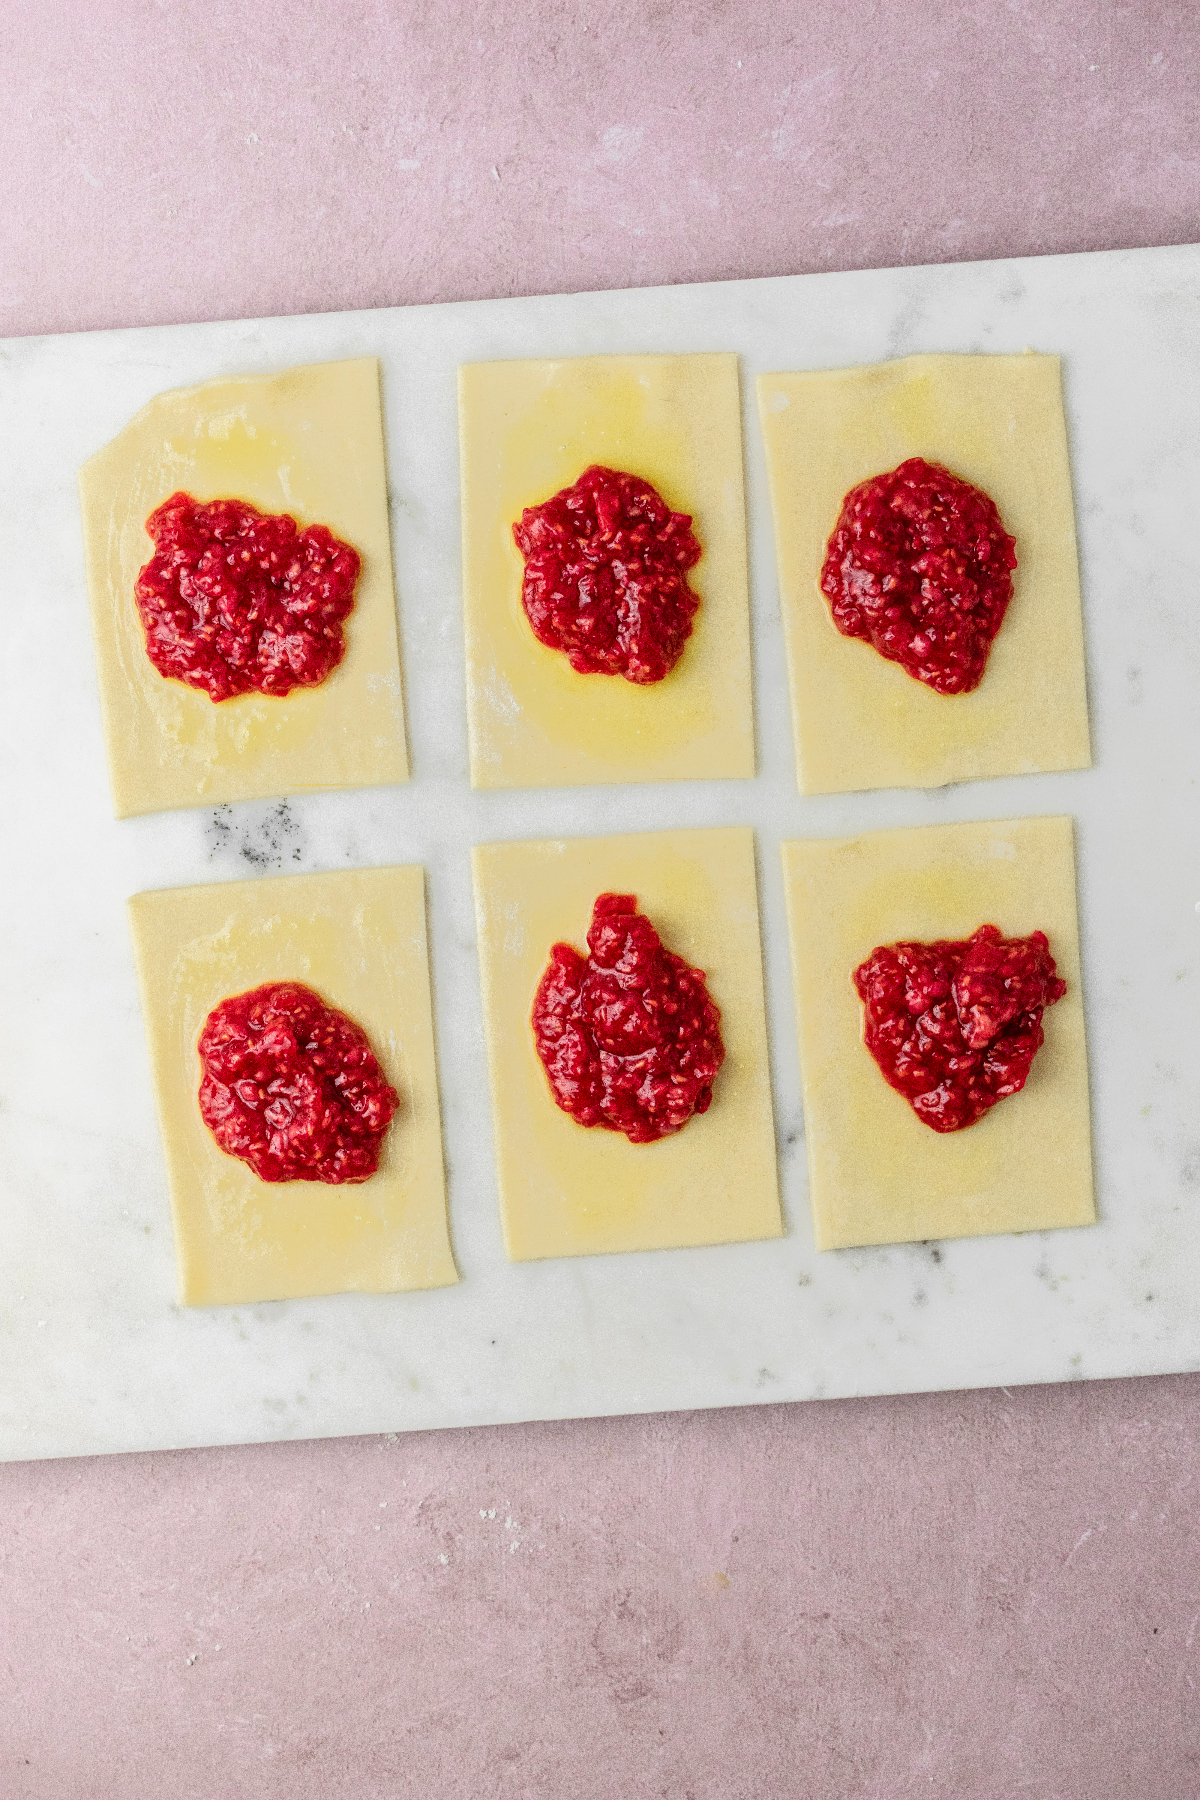 Pie dough cut into rectangles and being filled with raspberry jam.